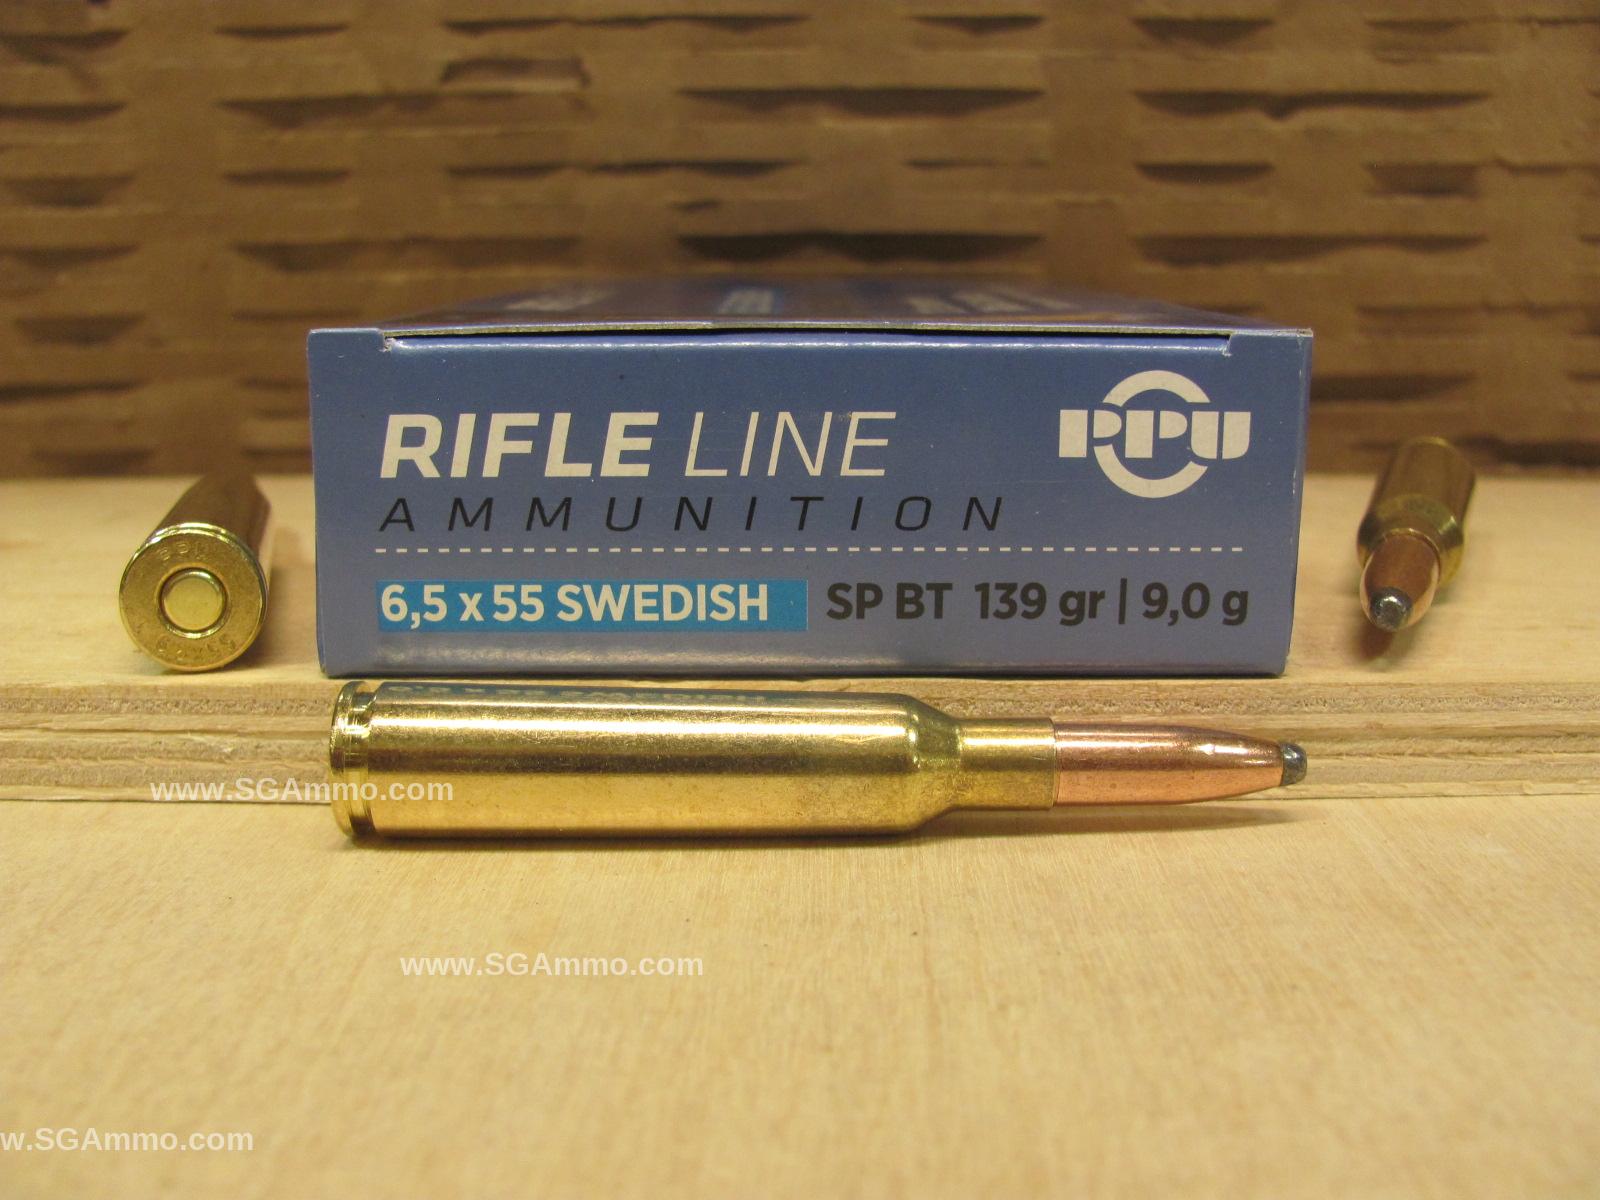 100 Round Plastic Can - 6.5x55 Swedish 139 Grain Soft Point Prvi Partizan Ammo - PP6SWS - Packed in Plastic Ammo Canister